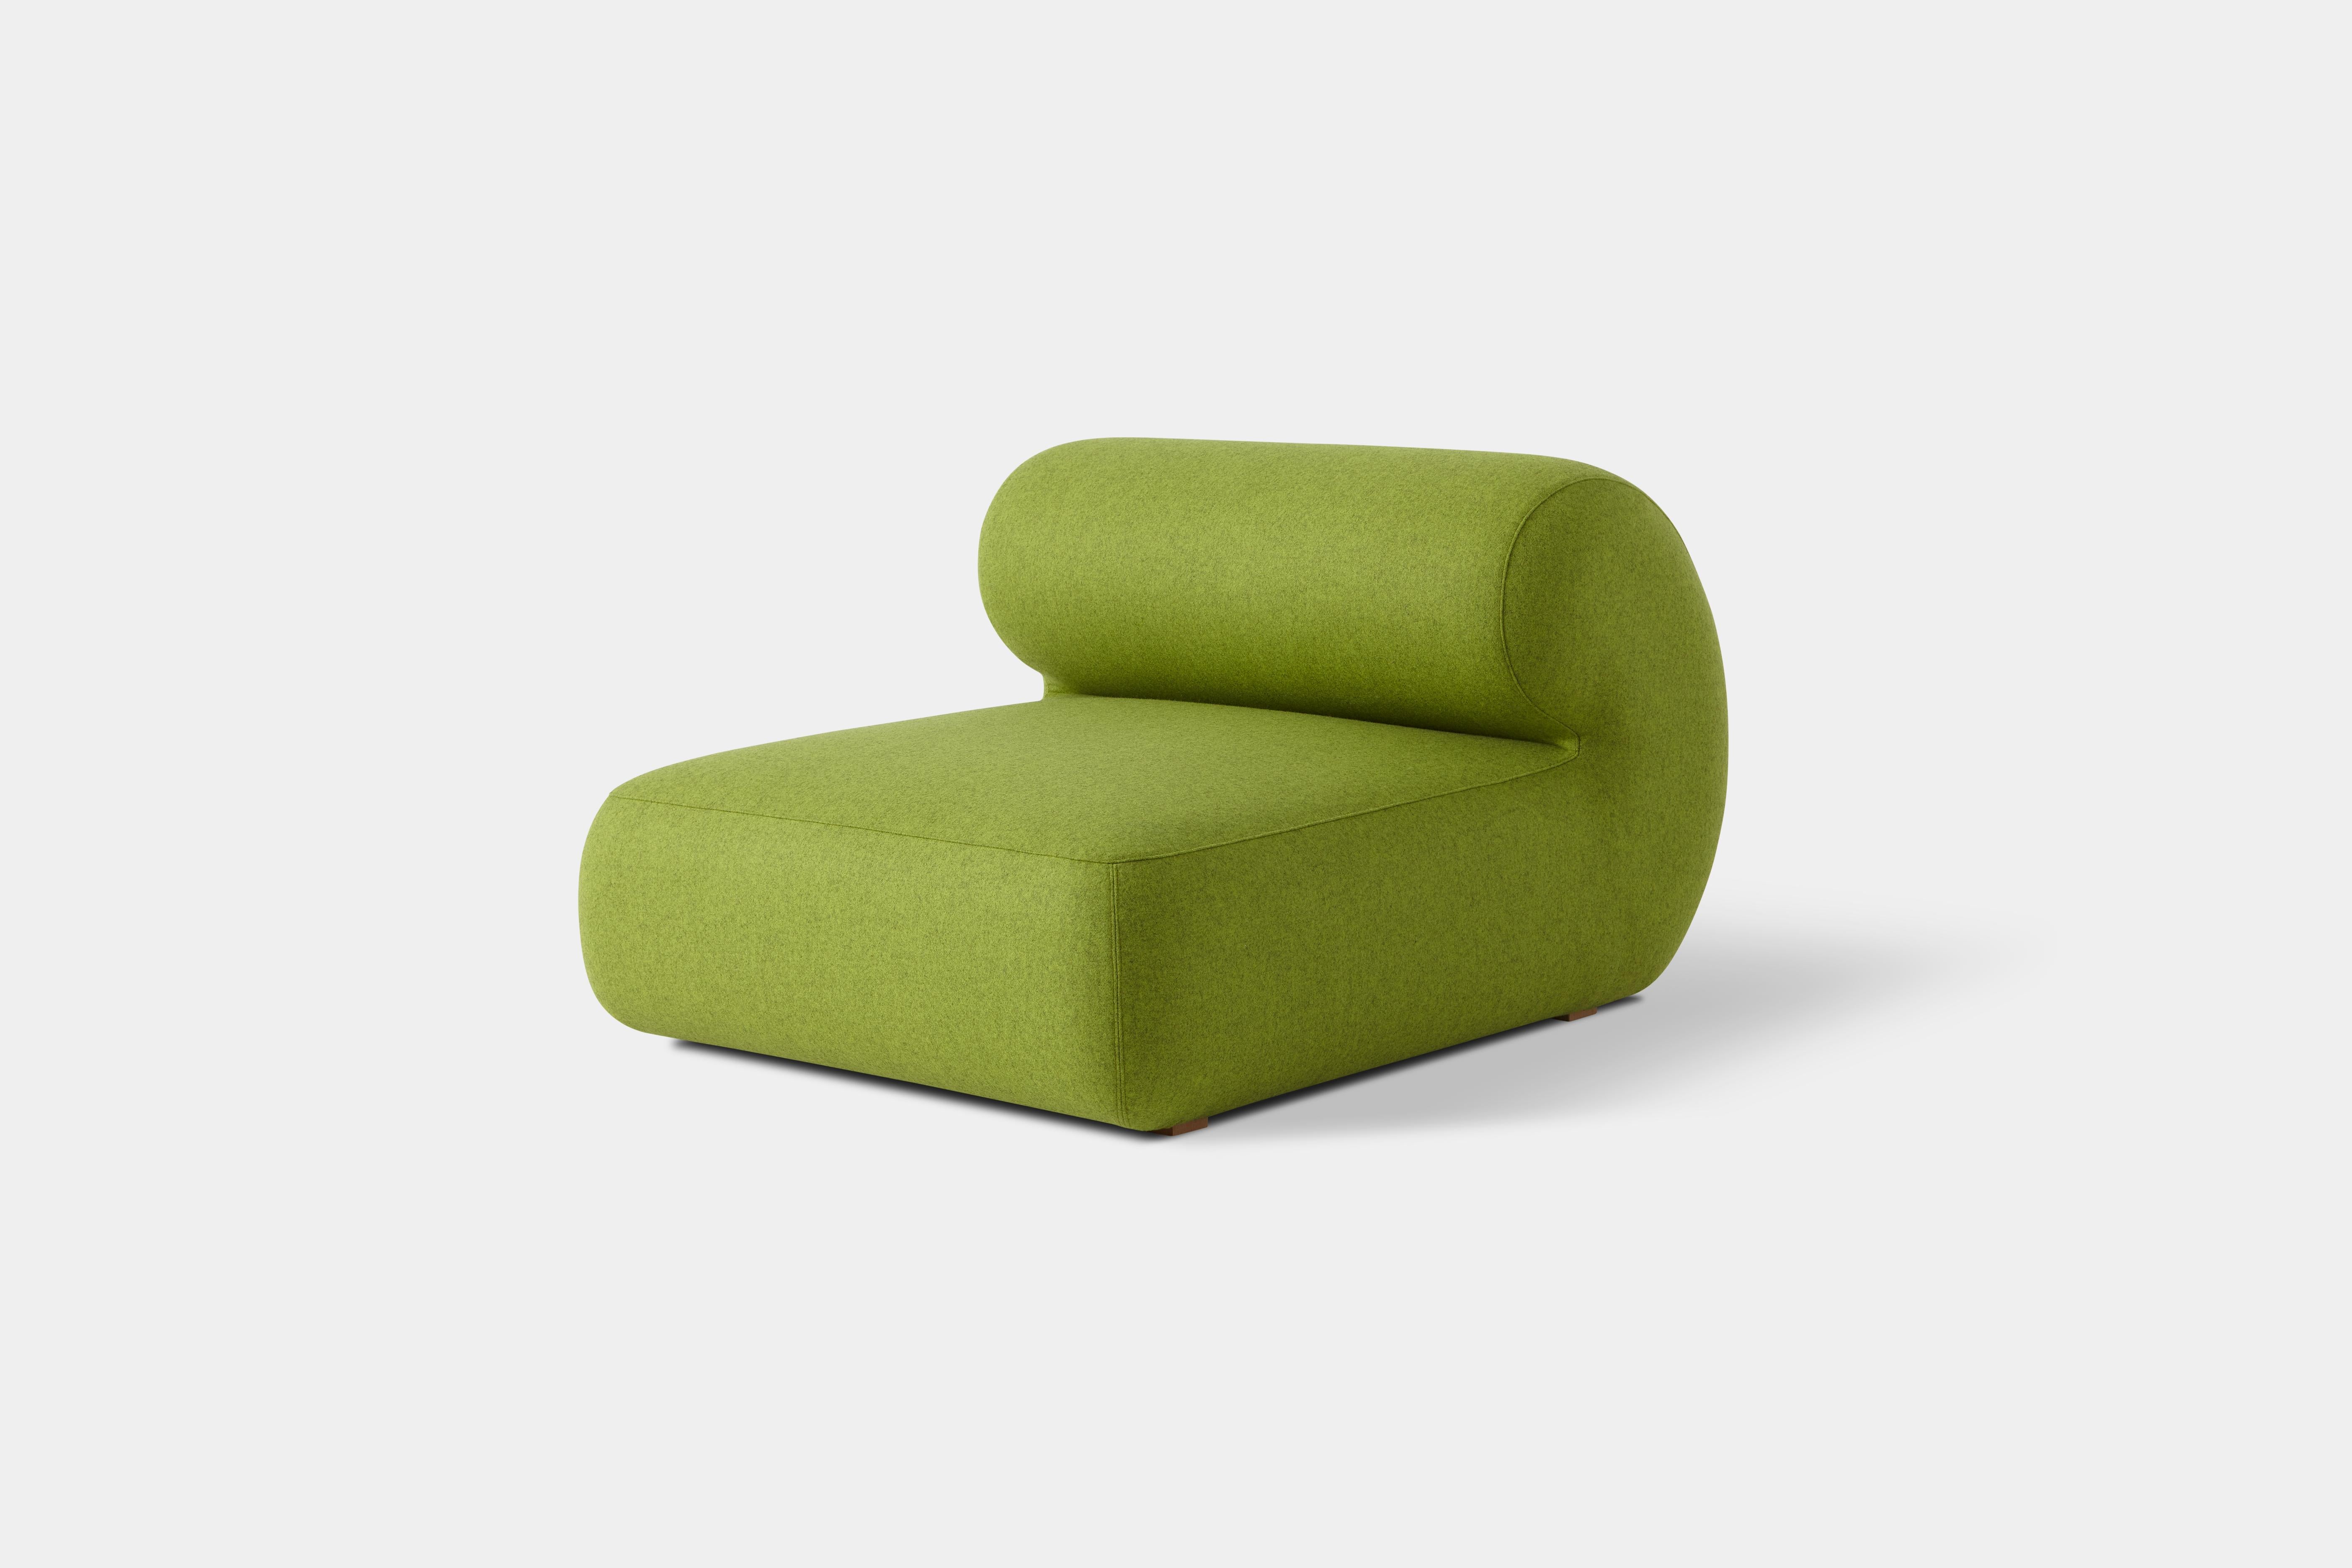 Green Michelin Straight Module by Pepe Albargues
Dimensions: W 103 x D 113 x H 71 cm
Materials: Pinewood, plywood and tablex structure.
Foam CMHR (high resilience and flame retardant) for all our cushion filling systems.
Lacquered beech wood